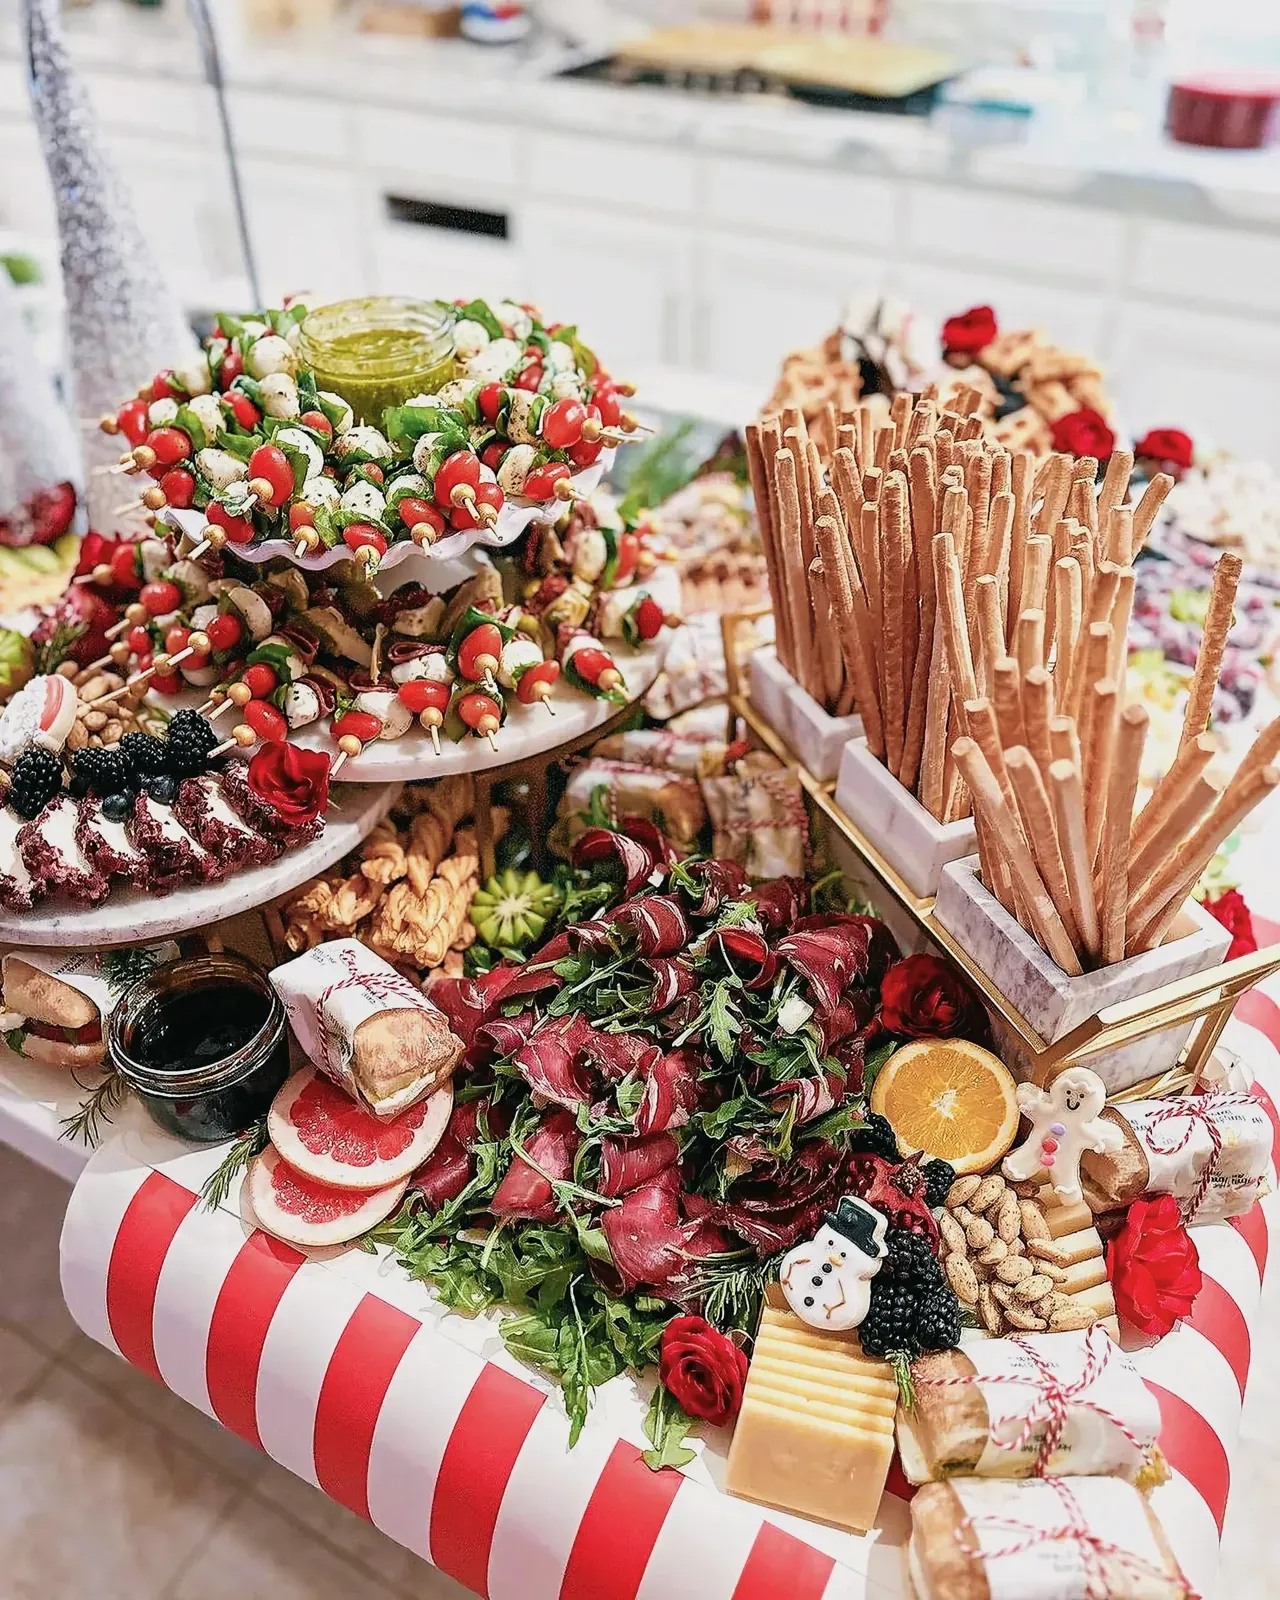 A festive feast of finger foods and holiday-themed snacks on a beautifully decorated table.